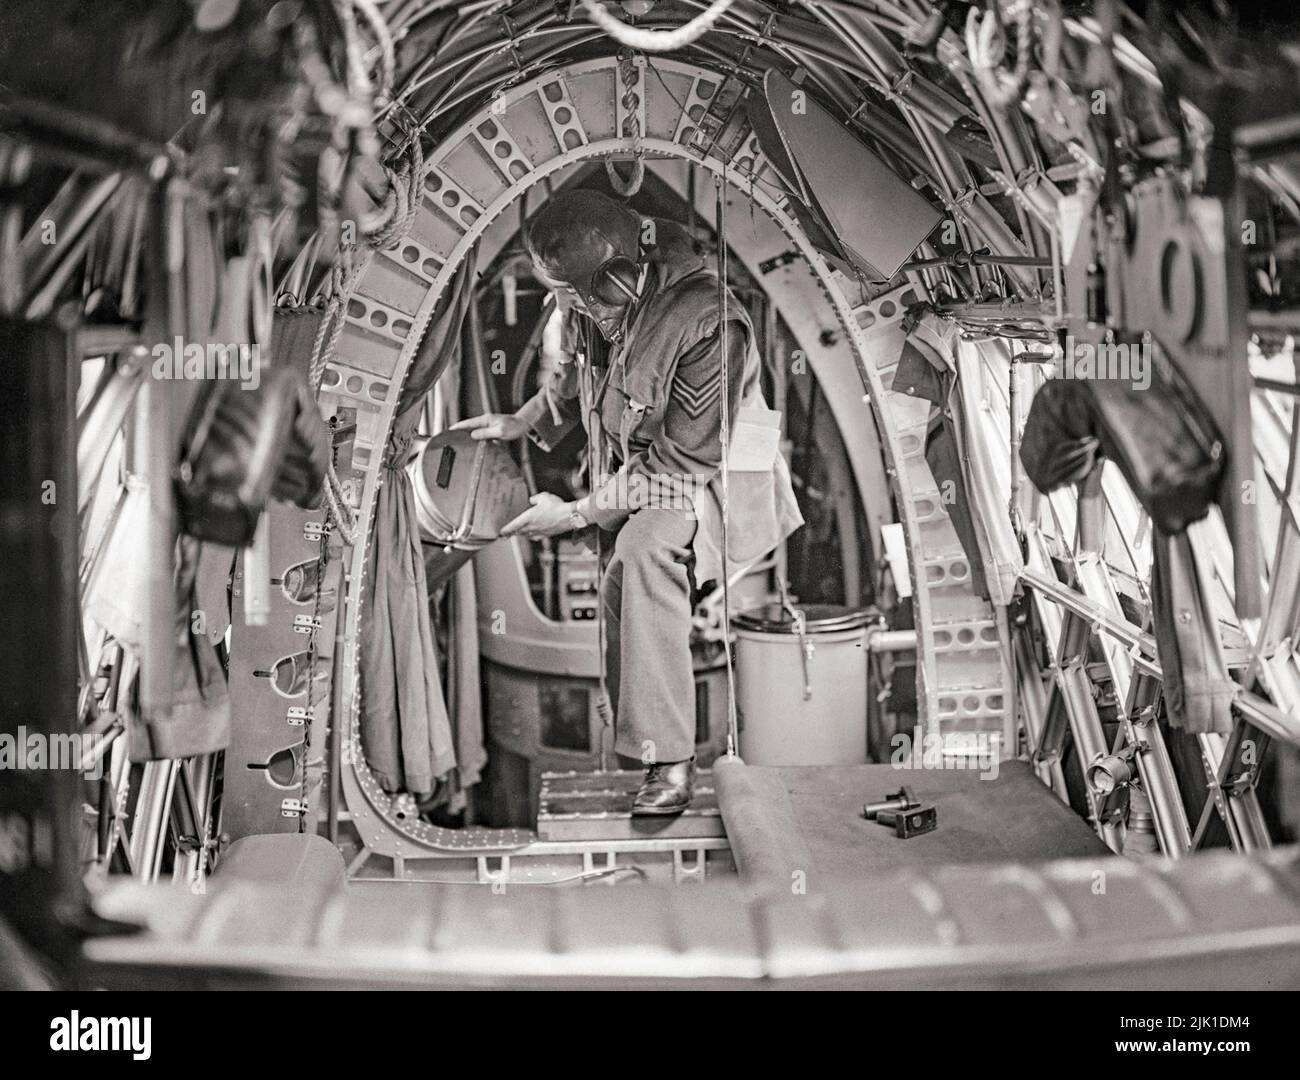 A crew member on board a Vickers Wellington of No. 75 (New Zealand) Squadron RAF places night flares in position in the cramped rear fuselage. The Wellington was a British twin-engined, long-range medium bomber designed in the mid-1930s used as a night bomber in the early years of the Second World War, performing as one of the principal bombers until superseded by the larger four-engined 'heavies' such as the Avro Lancaster. It holds the distinction of having been the only British bomber that was produced for the duration of the war. Stock Photo